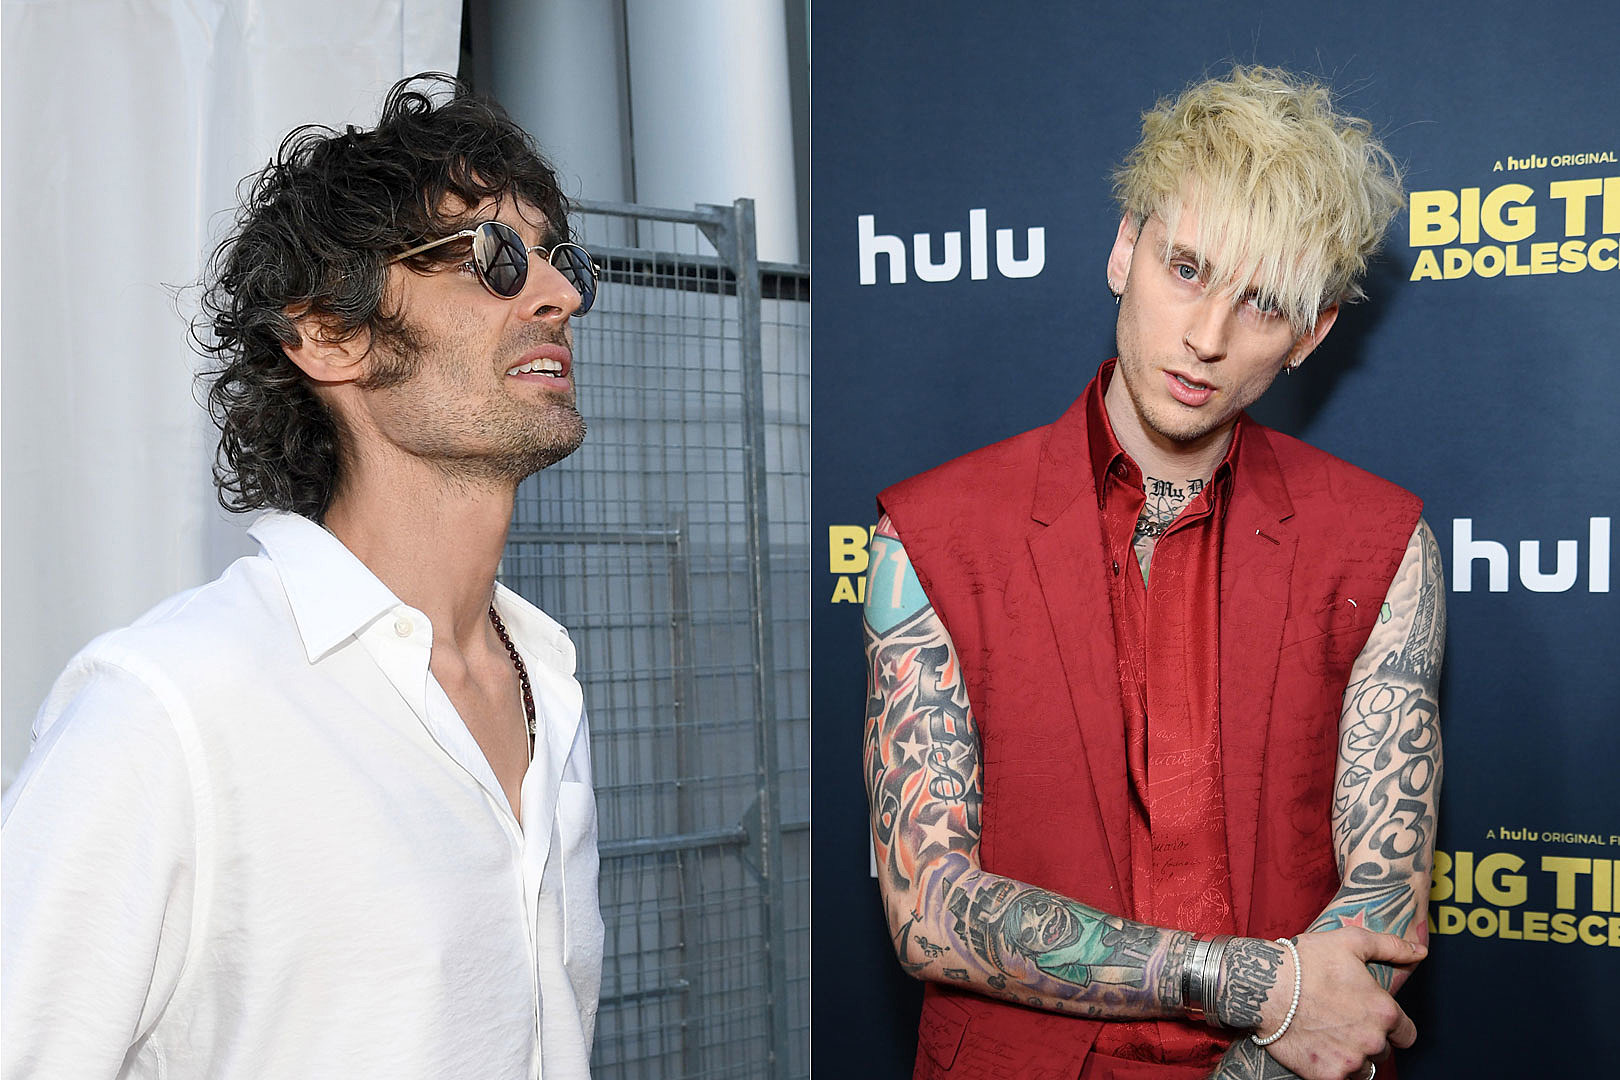 Ritter Used MGK's 'Ballistic' Confrontation Over Fox for Film